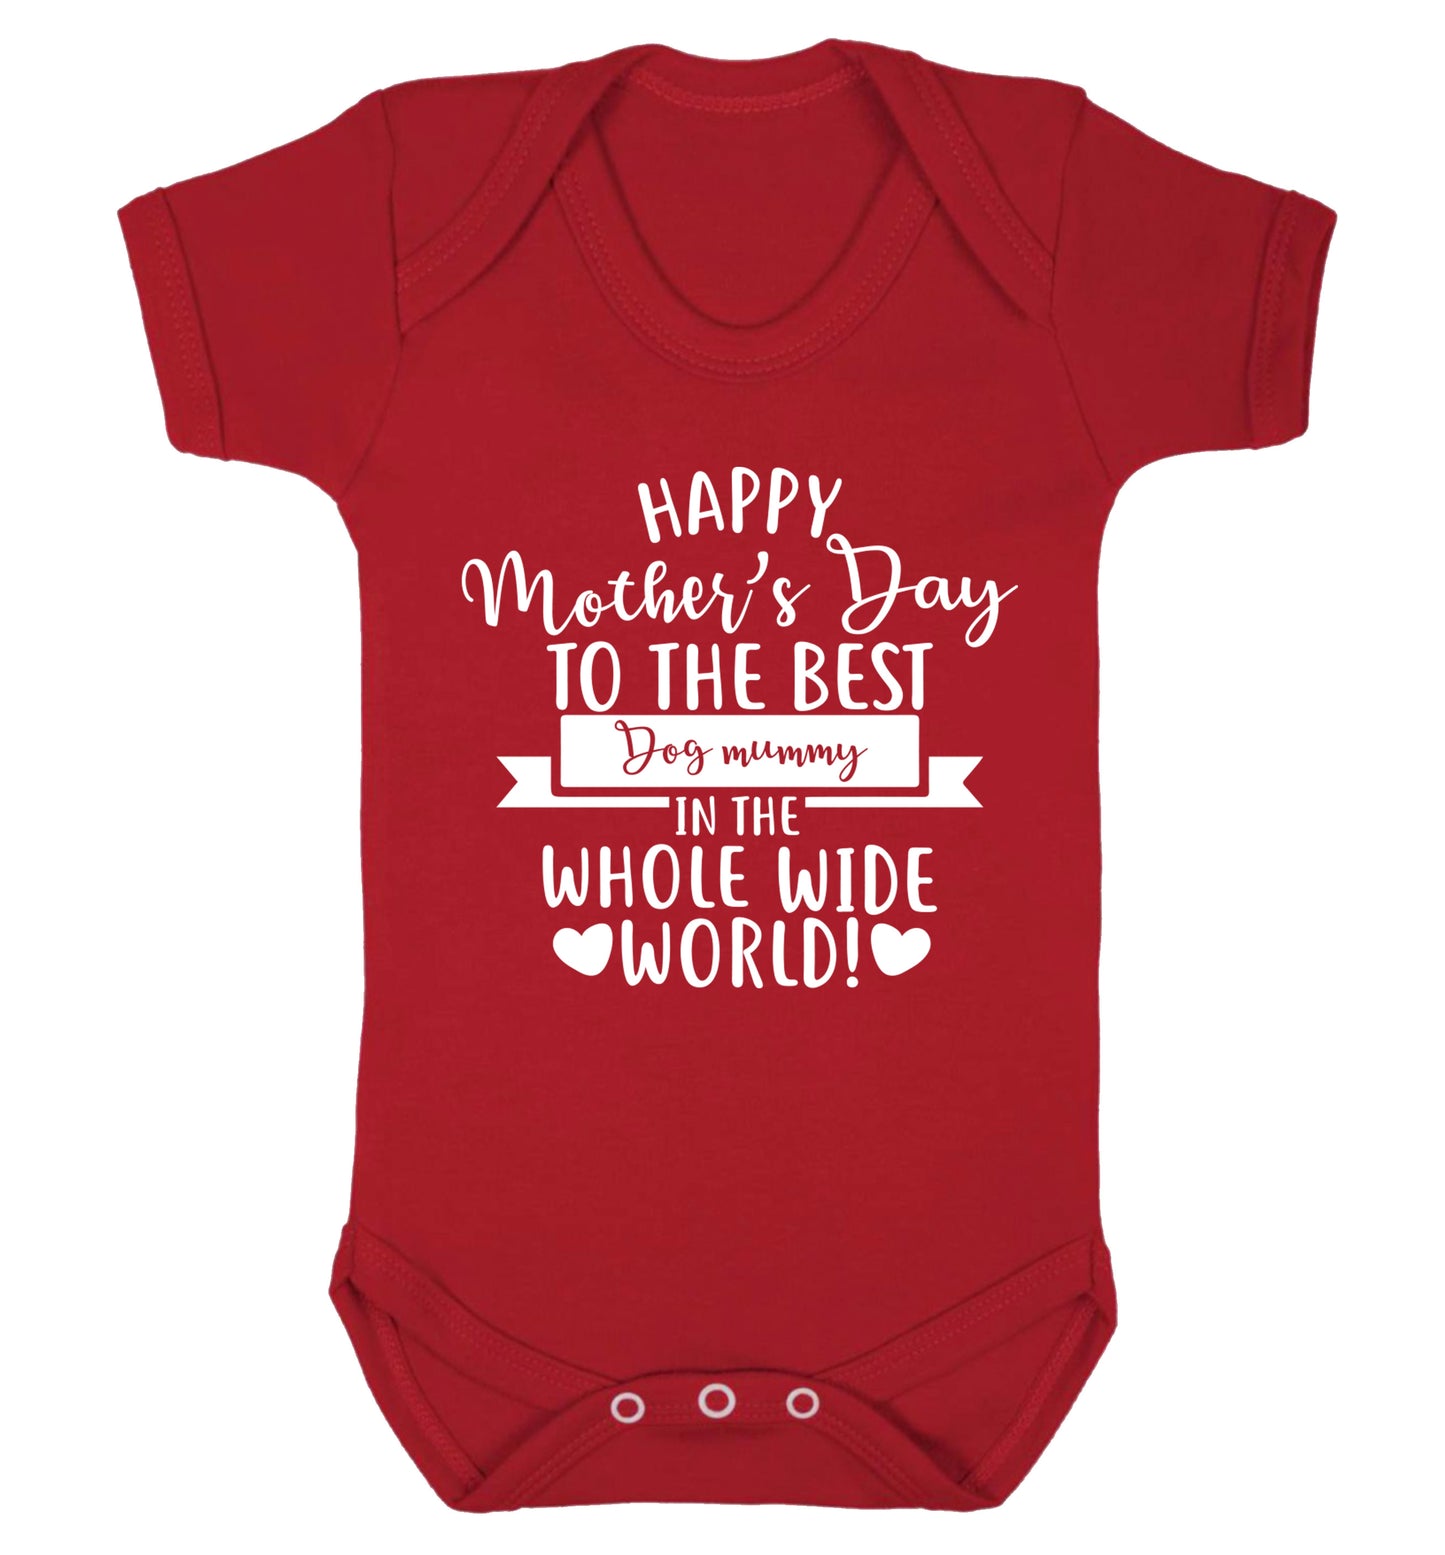 Happy mother's day to the best dog mummy in the world Baby Vest red 18-24 months